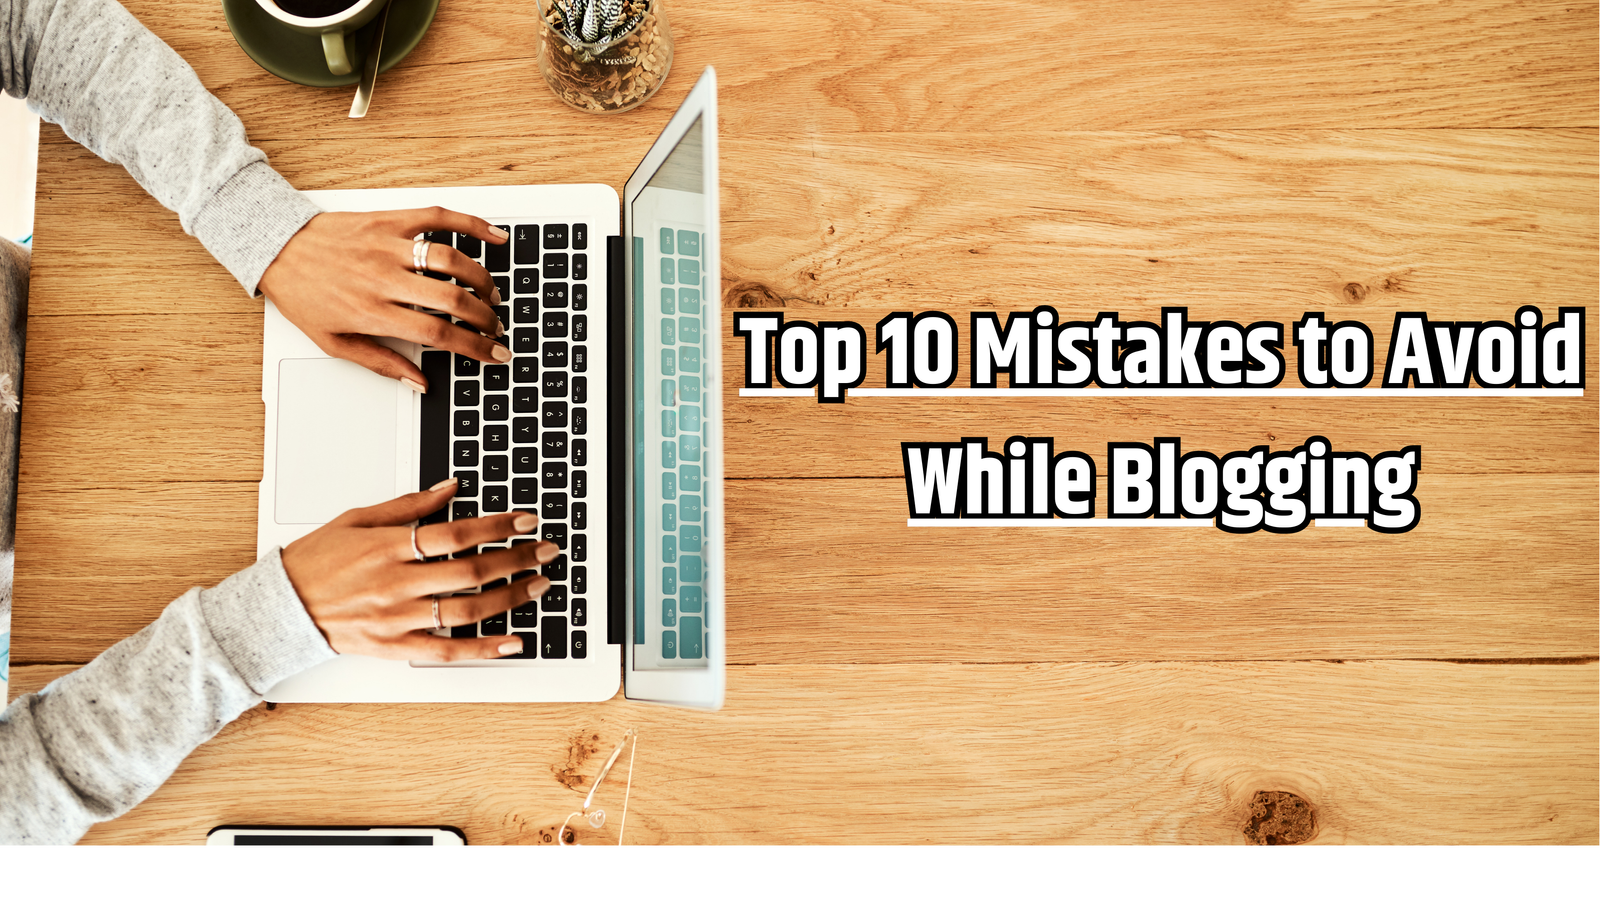 Top 10 Mistakes to Avoid While Blogging